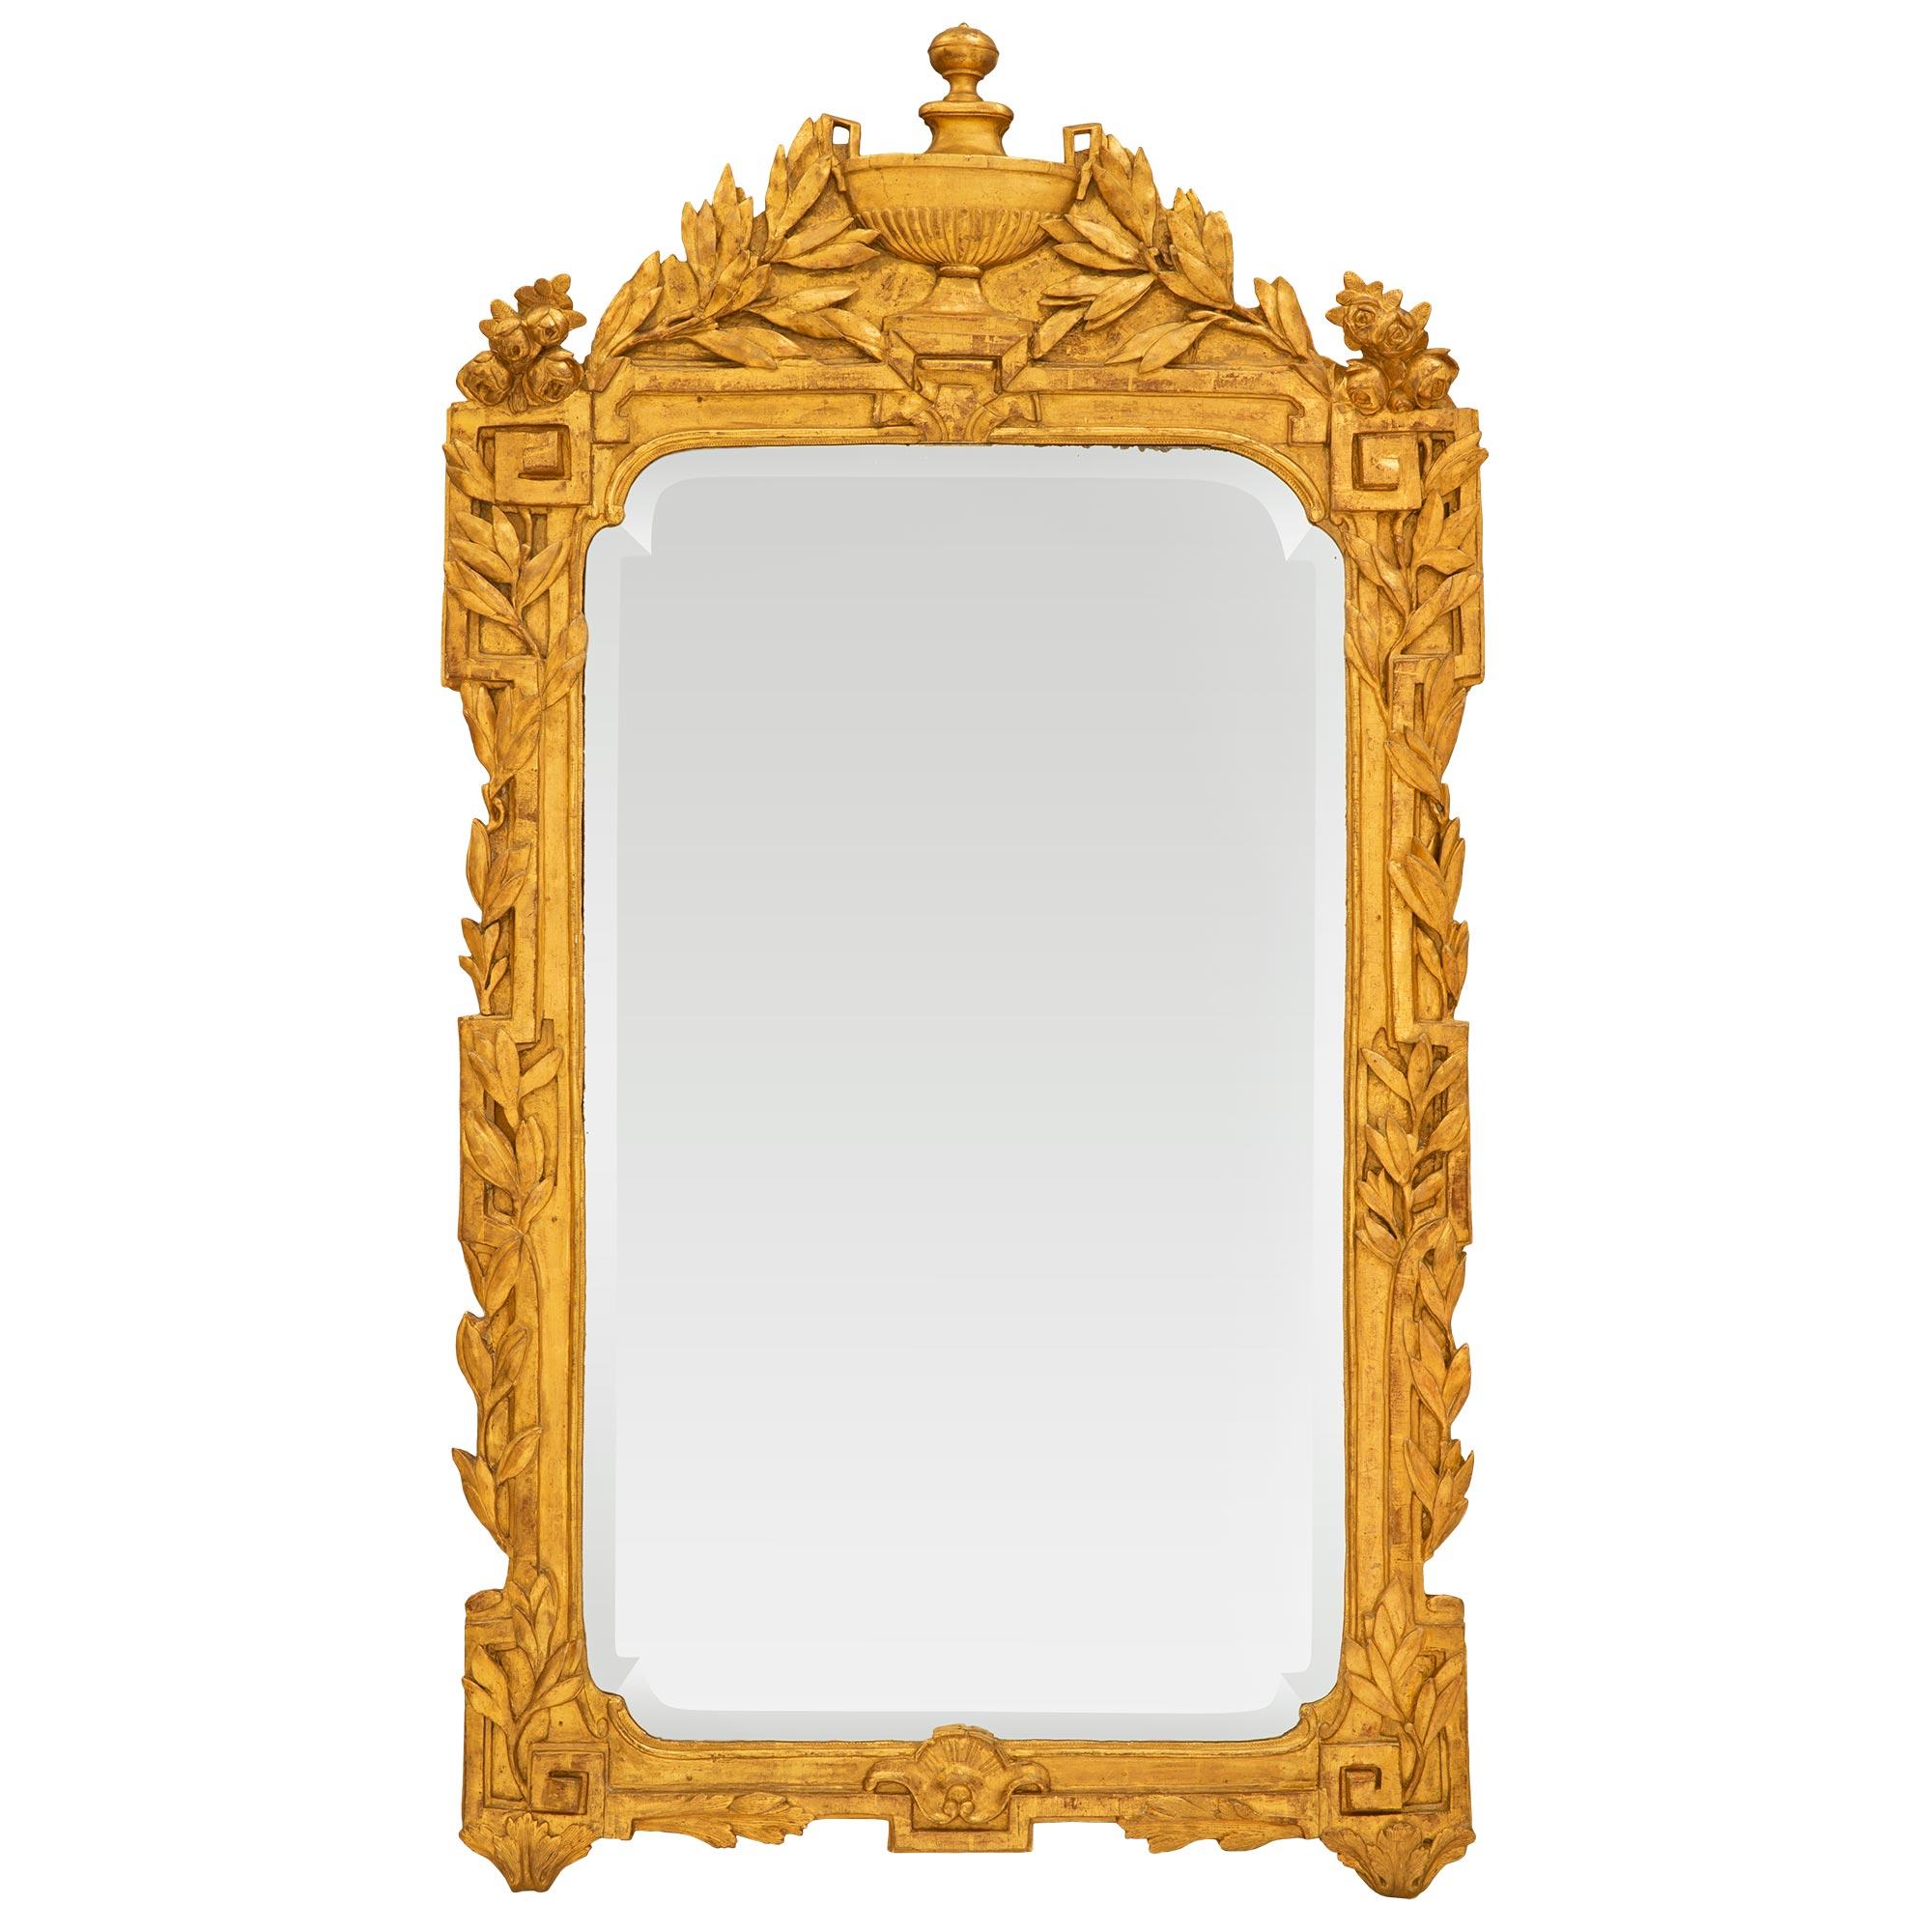 A stunning French 18th century provincial Regence period giltwood mirror. The mirror has the original bevelled mirror plate fitted within a giltwood frame. The frame has a Greek key design adorned with finely carved foliate garlands up each side and